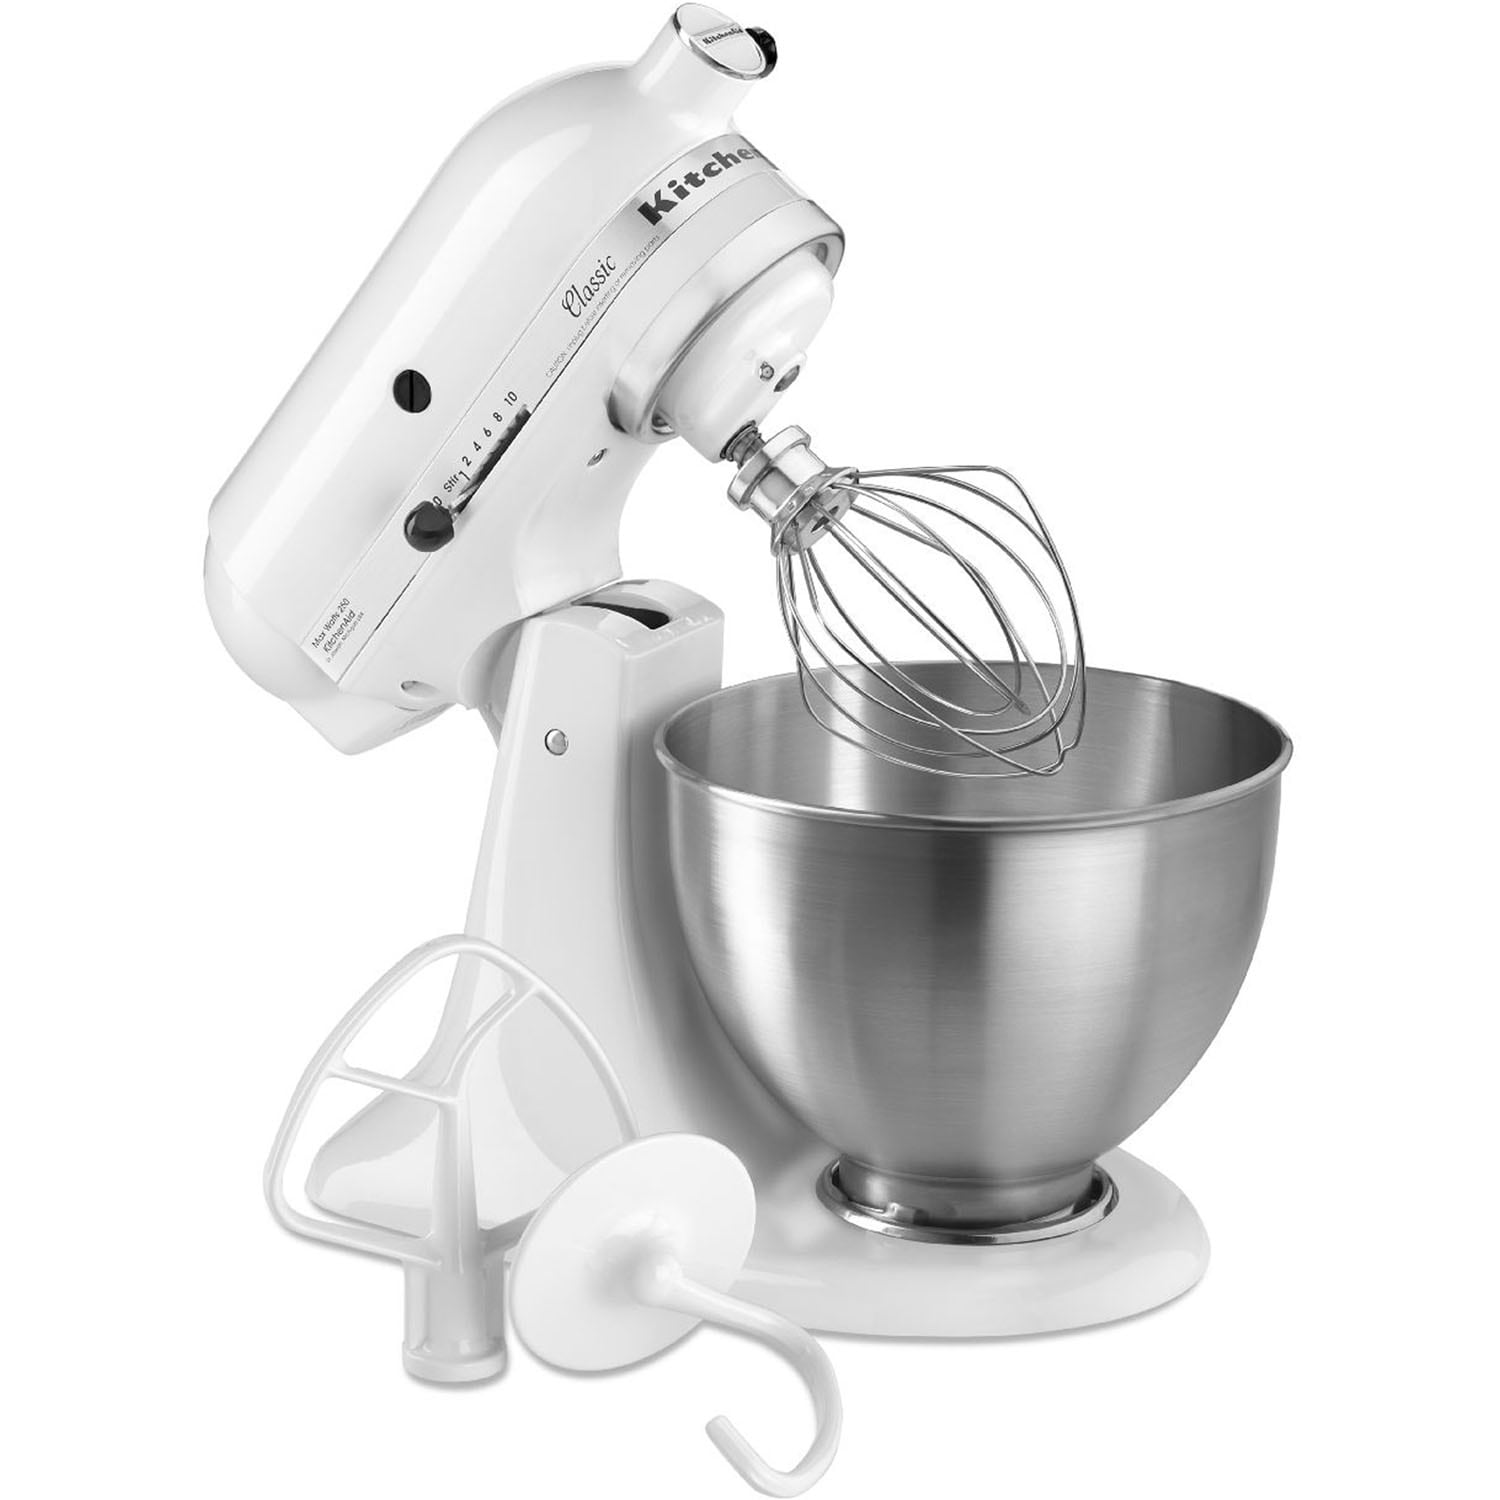 https://ak1.ostkcdn.com/images/products/is/images/direct/16032301d8a547befc76d311cd1a4261afc042a9/KitchenAid-4.5-Quart-Classic-Series-Stand-Mixer.jpg